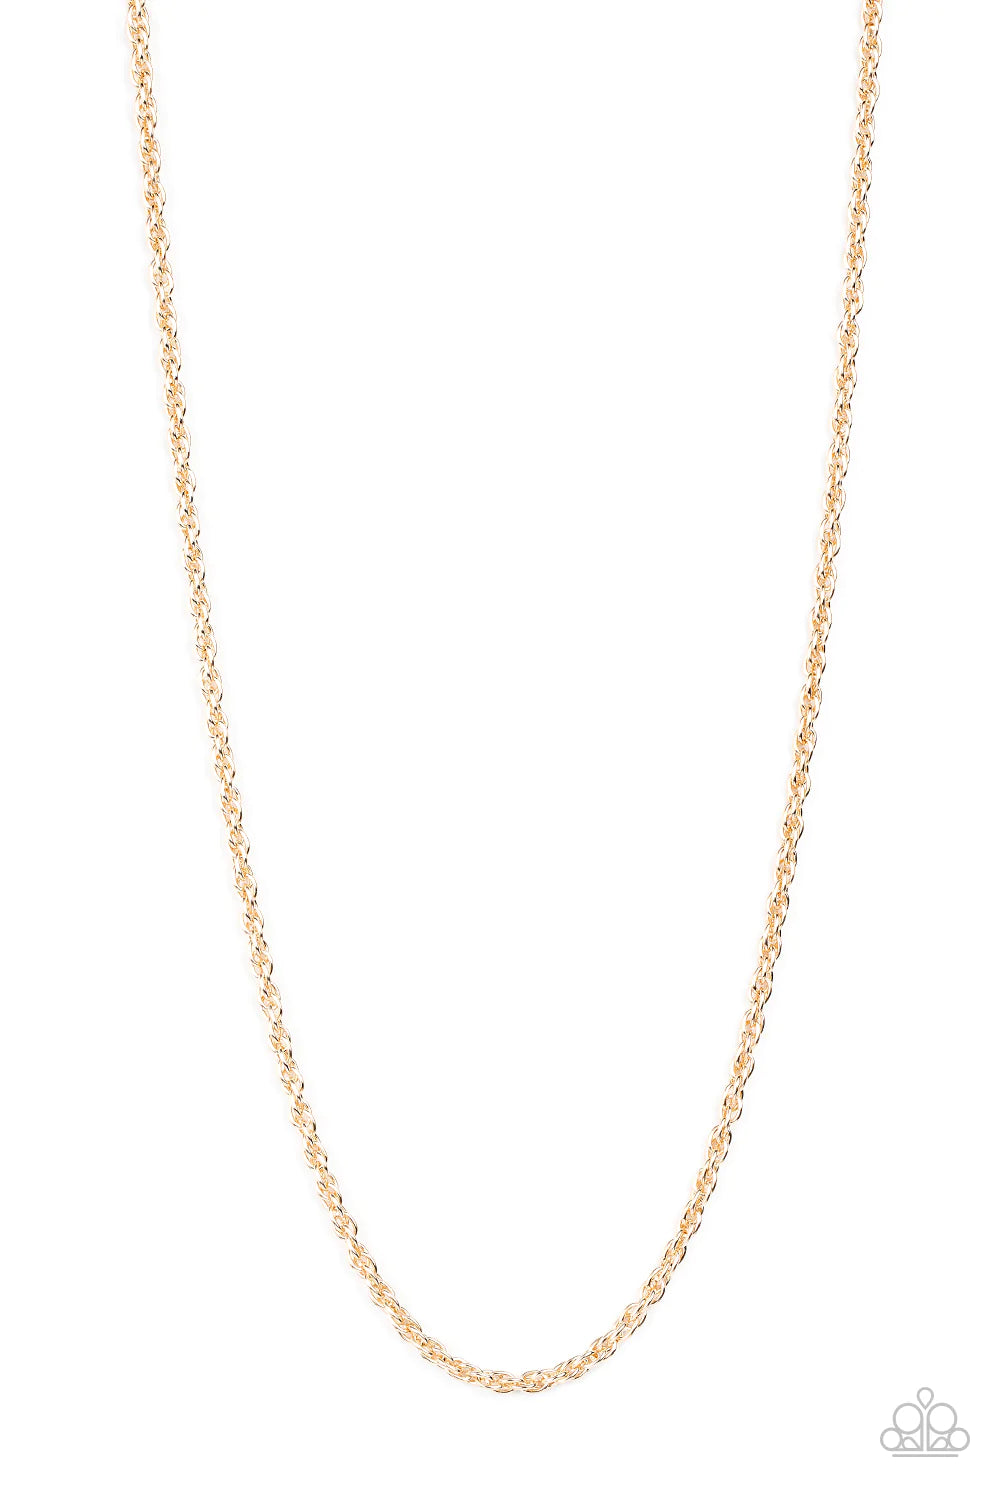 Paparazzi Accessories Industrial Interval - Gold A decoratively linked gold chain drapes below the collar for an edgy urban look. Features an adjustable clasp closure. Sold as one individual necklace. Jewelry